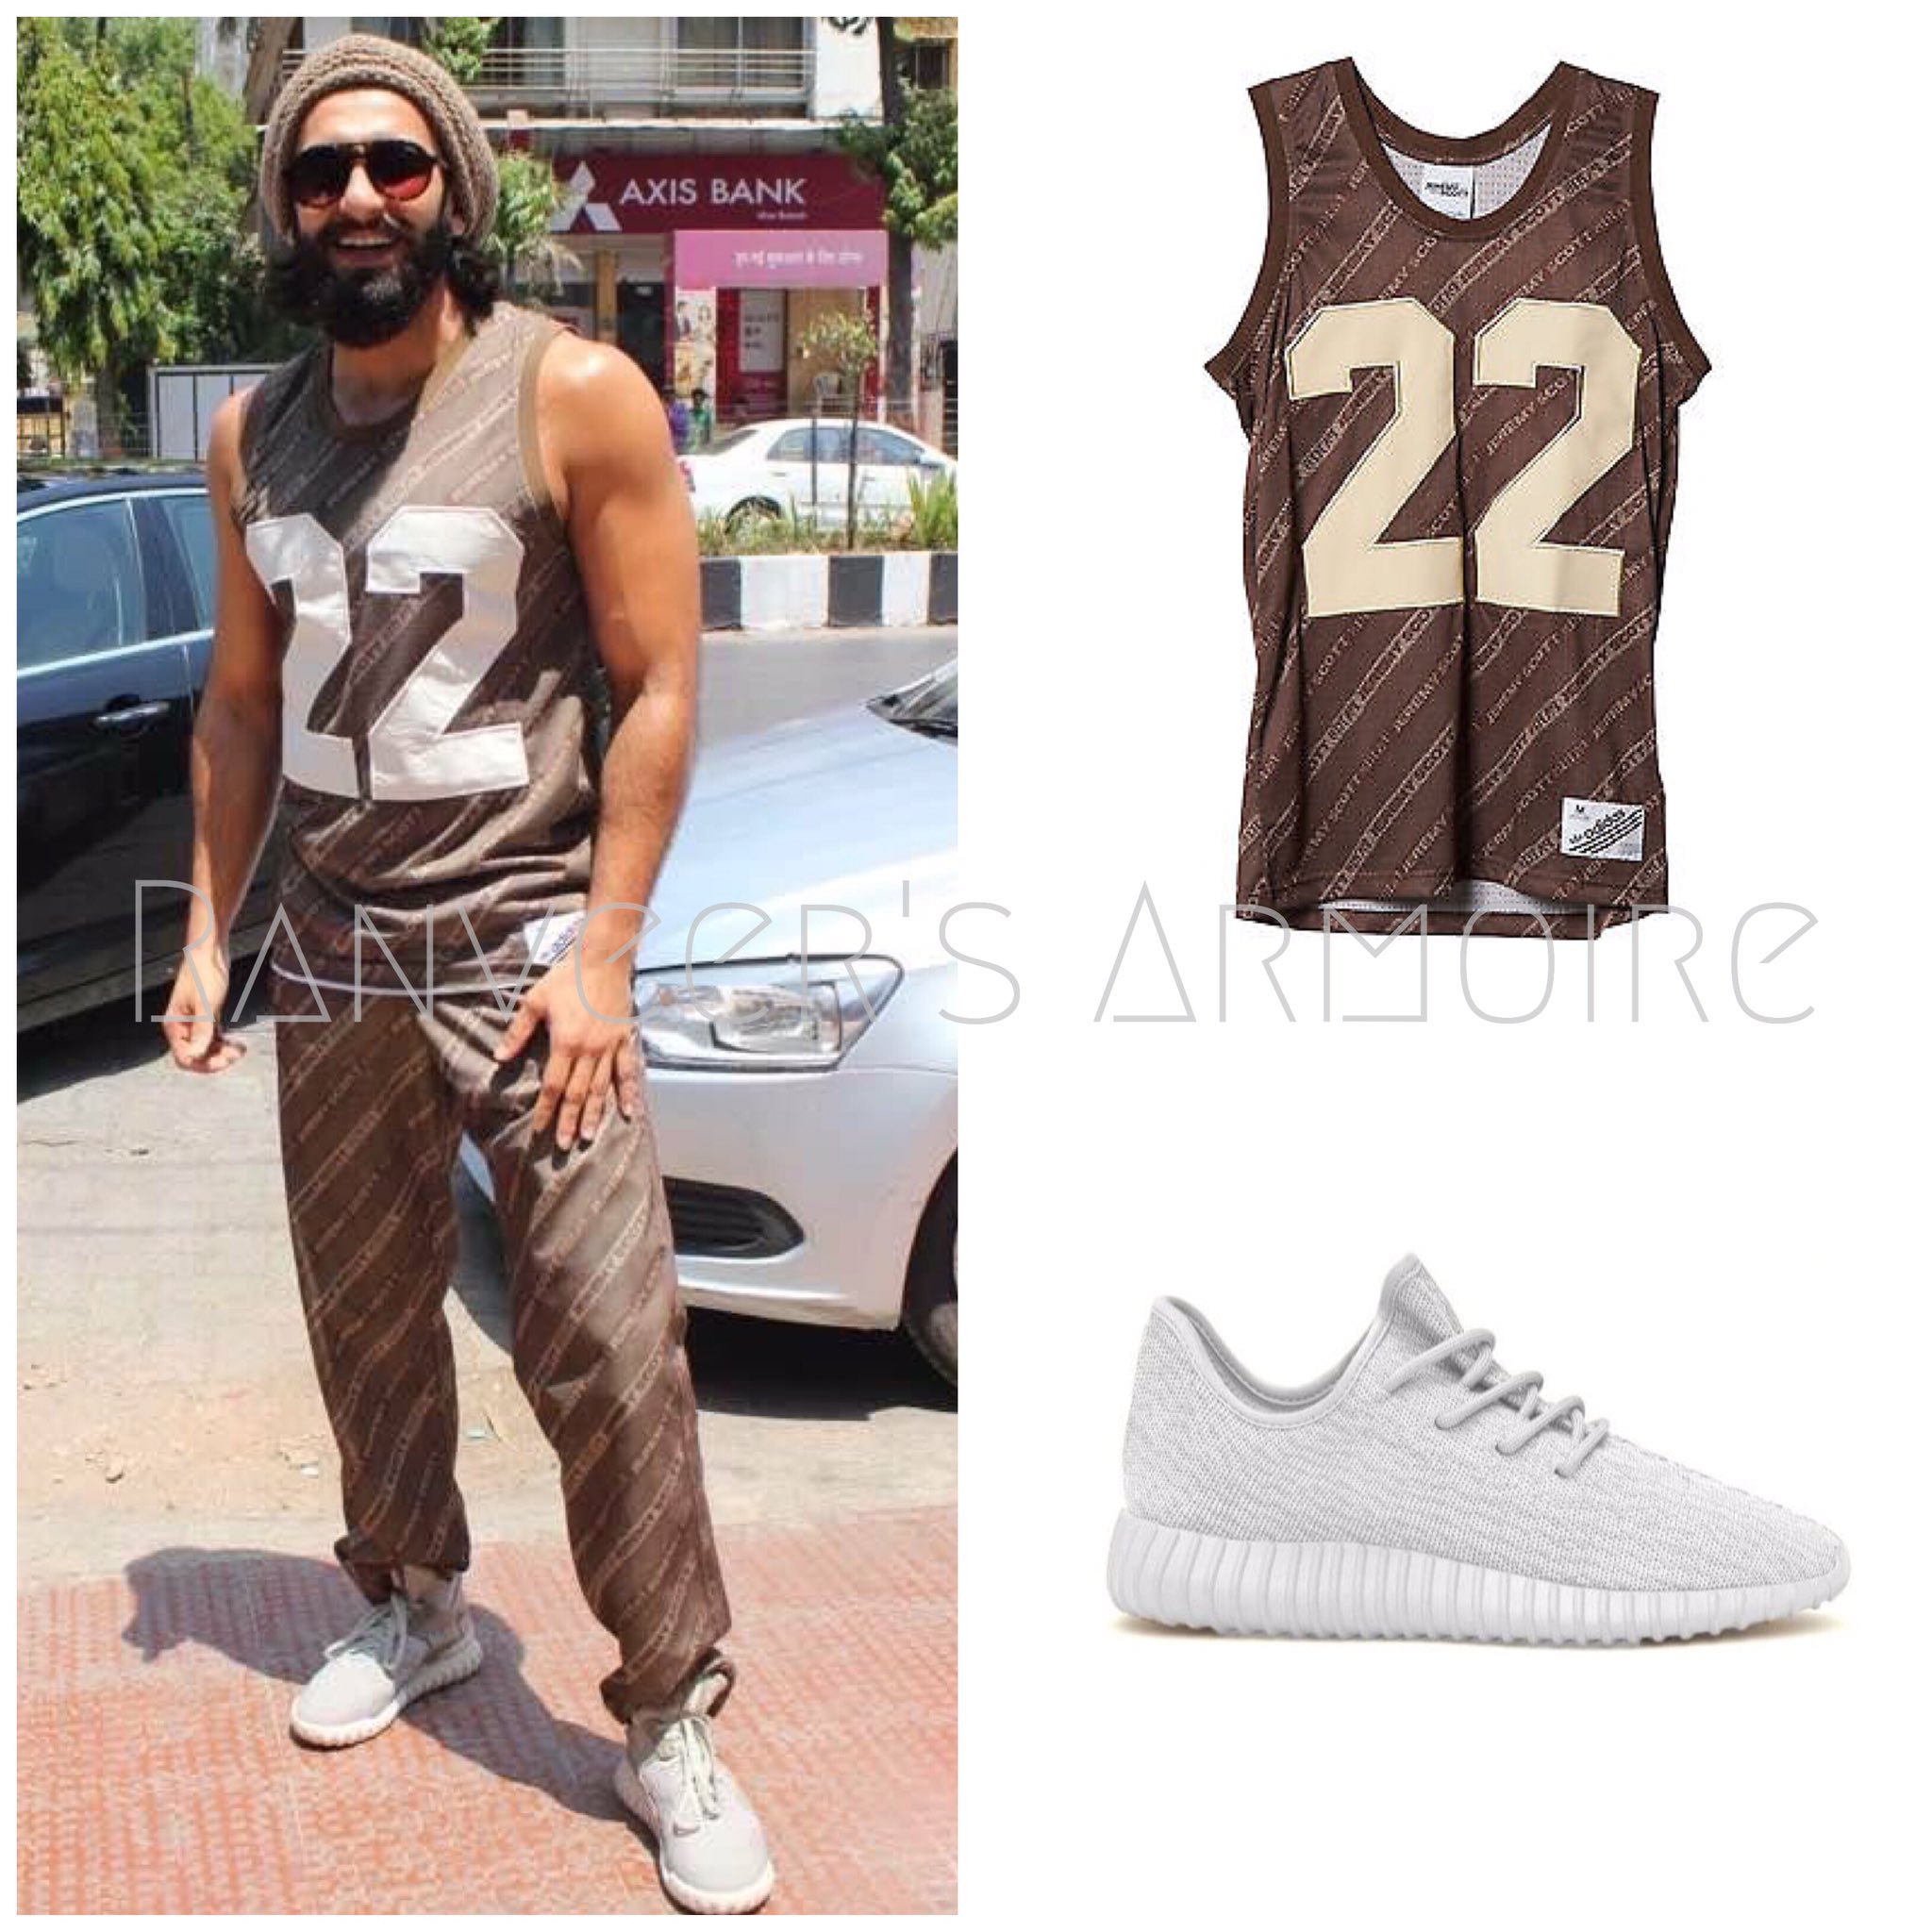 What RS Wore on Twitter: "Ranveer Singh before his gym session today,  wearing a Jeremy Scott x Adidas Originals outfit, Yeezys &amp; Carrera  sunglasses ❤ https://t.co/LKR2ips9sY" / Twitter